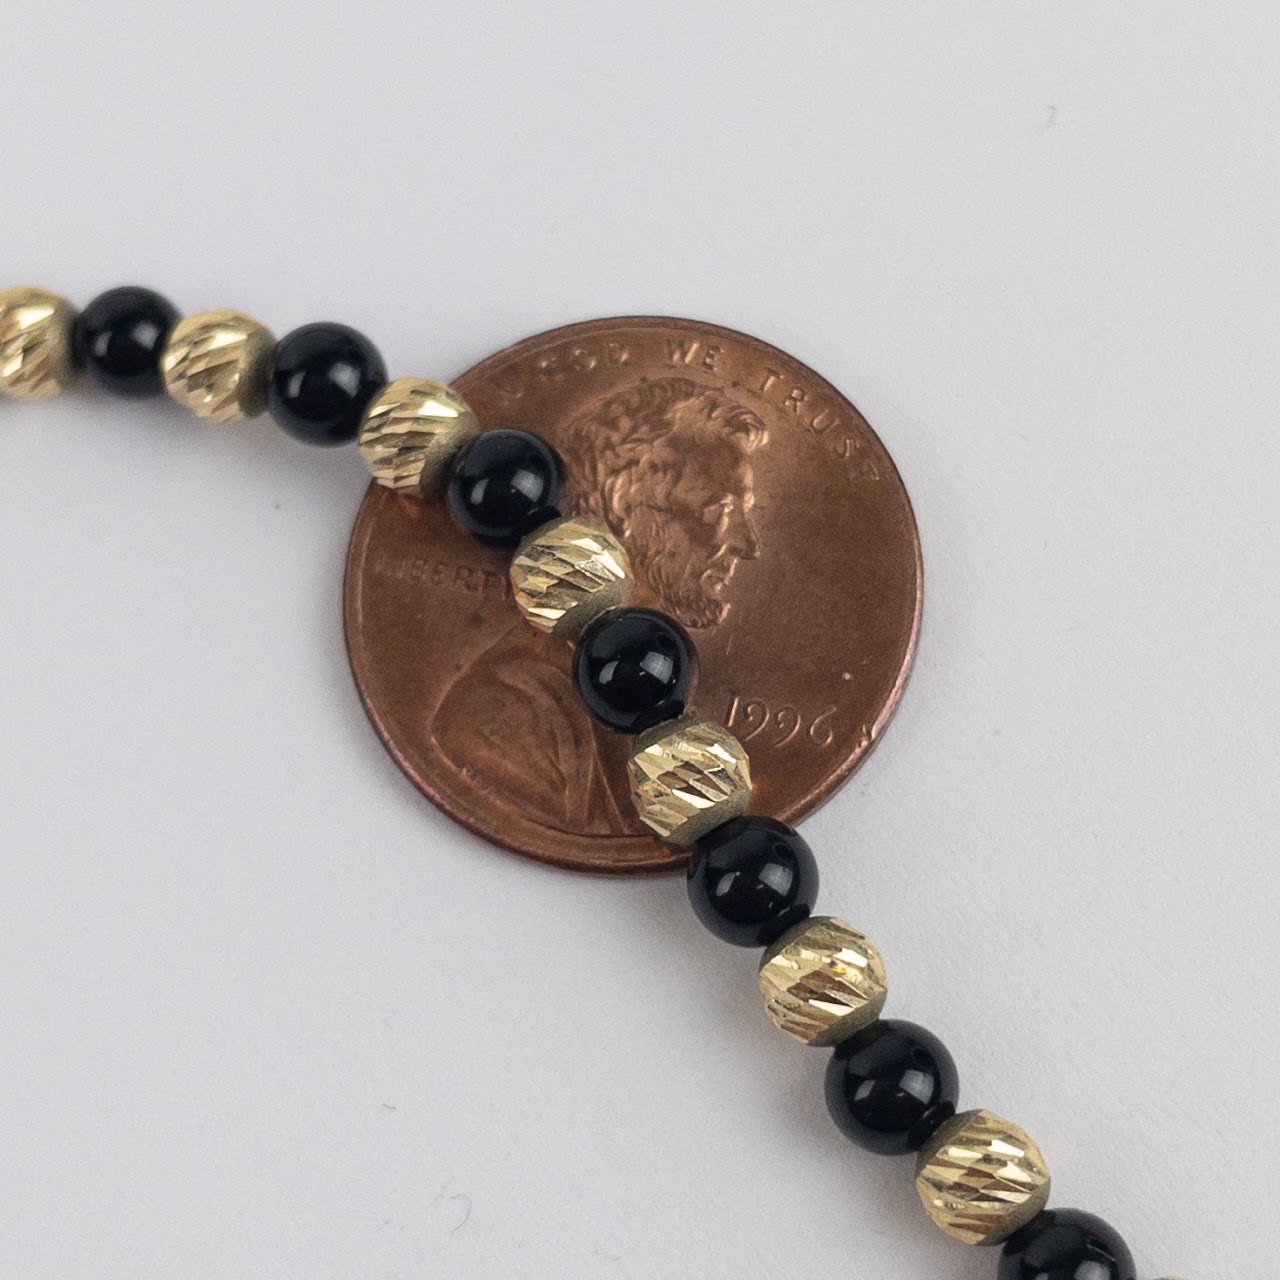 14K Gold & Obsidian Bead Necklace